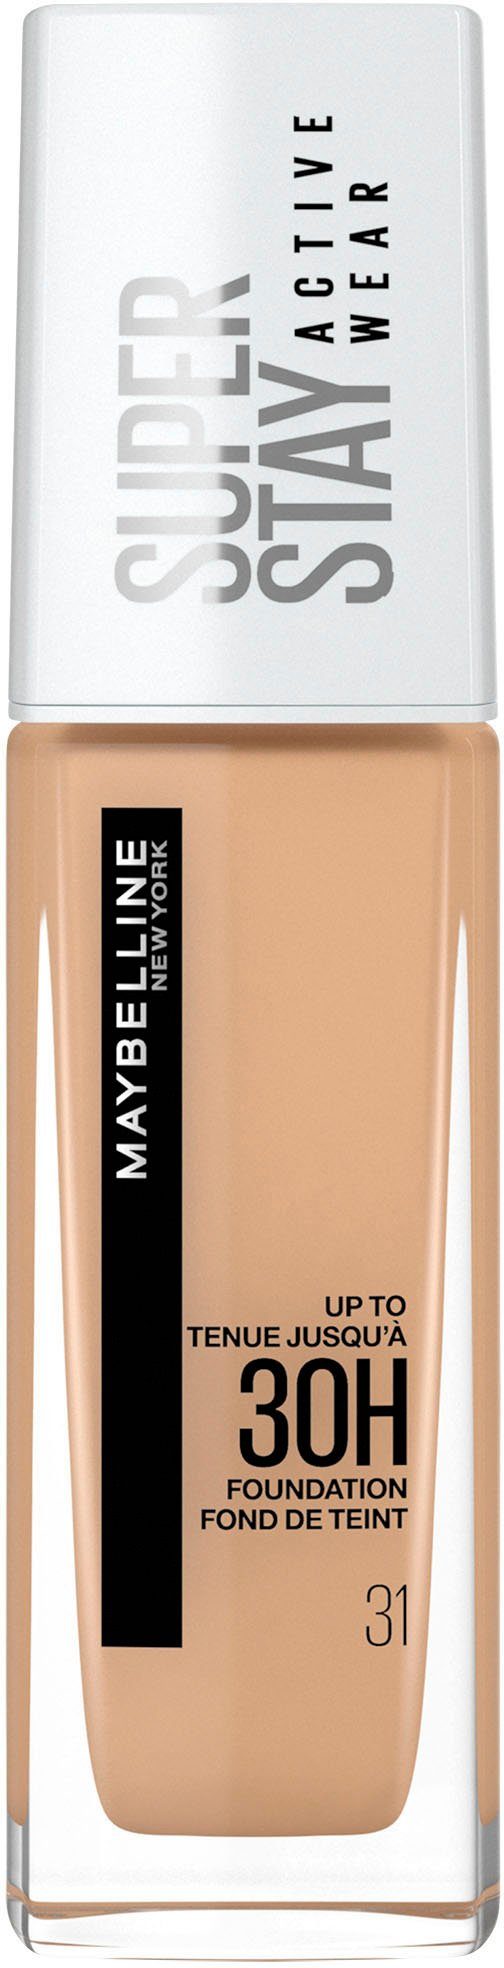 MAYBELLINE NEW YORK Foundation Super Warm Stay Nude 31 Wear Active